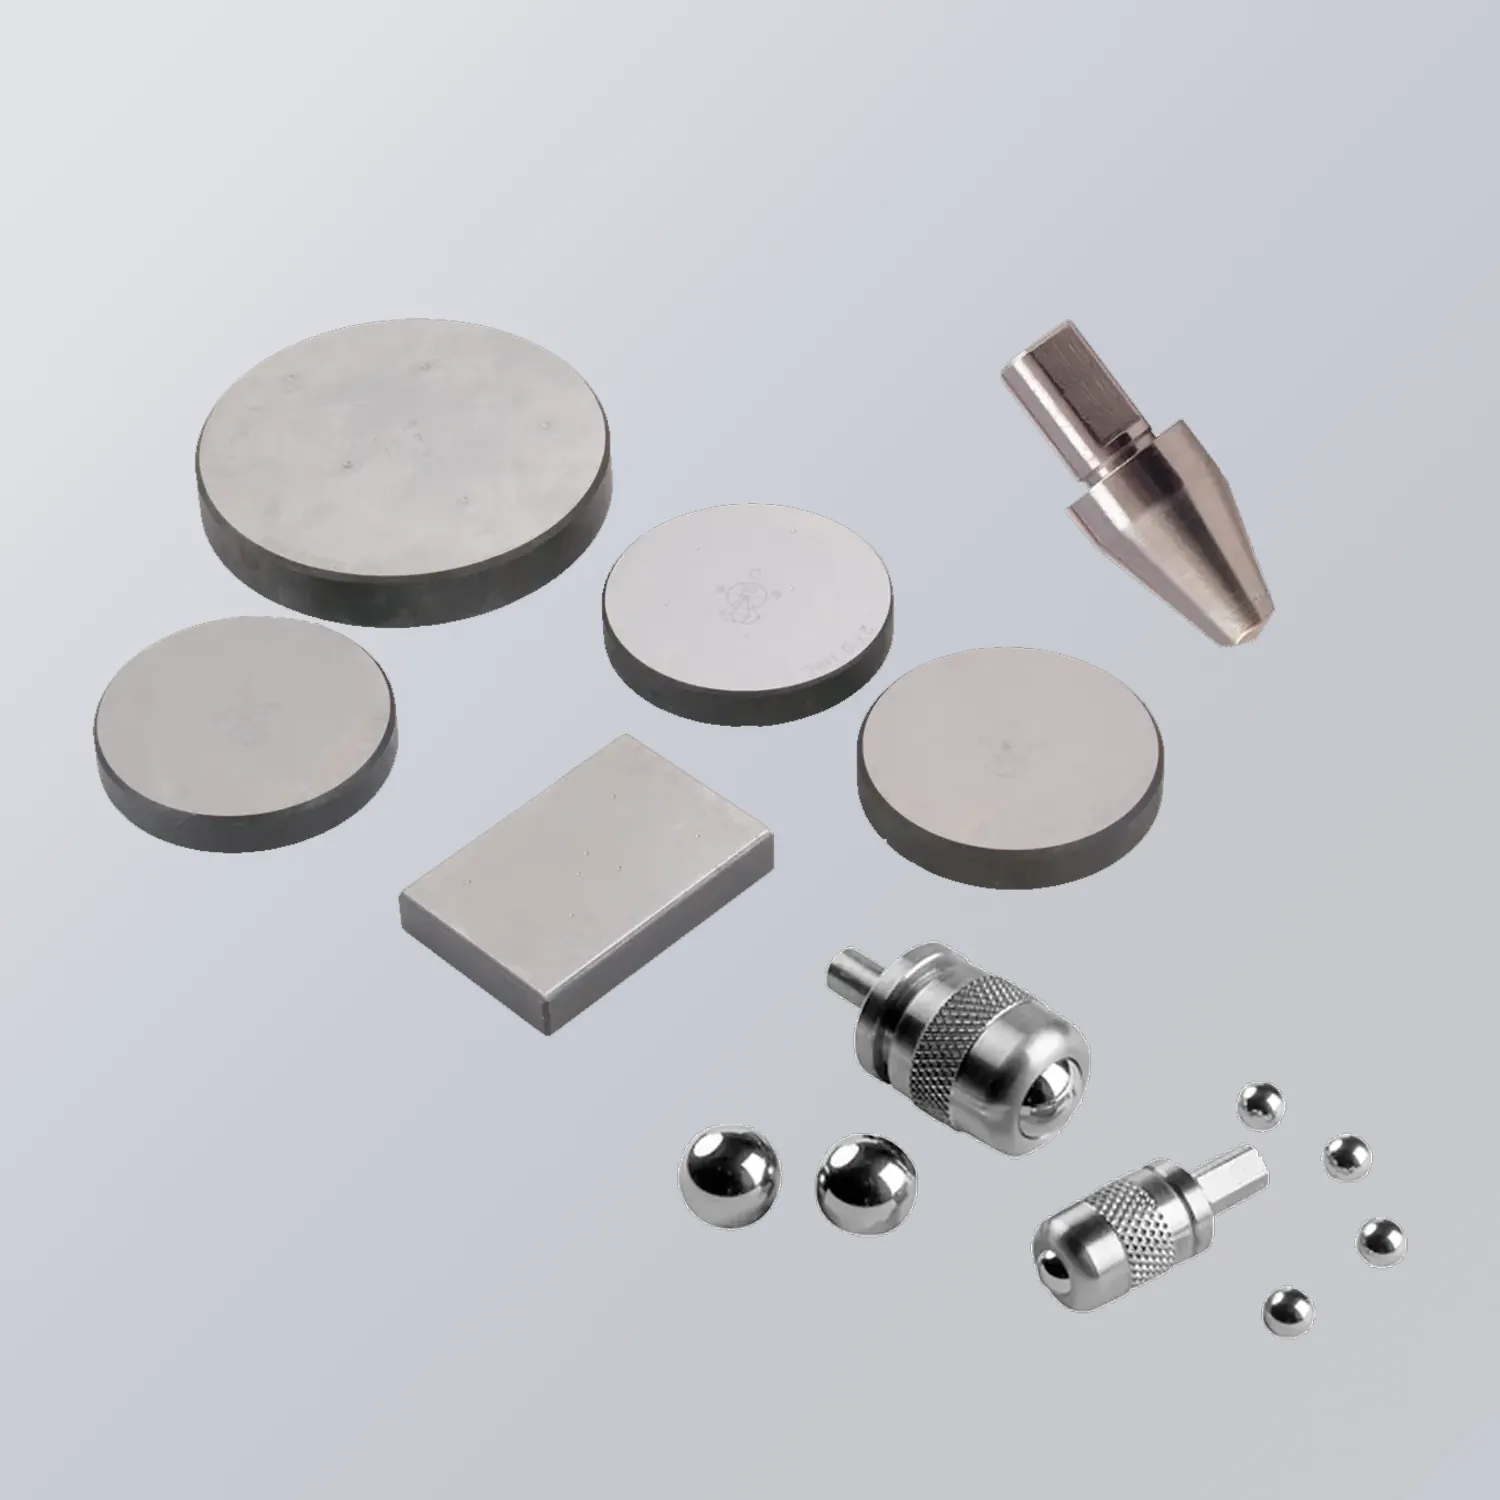 Metallographic hardness testing consumables